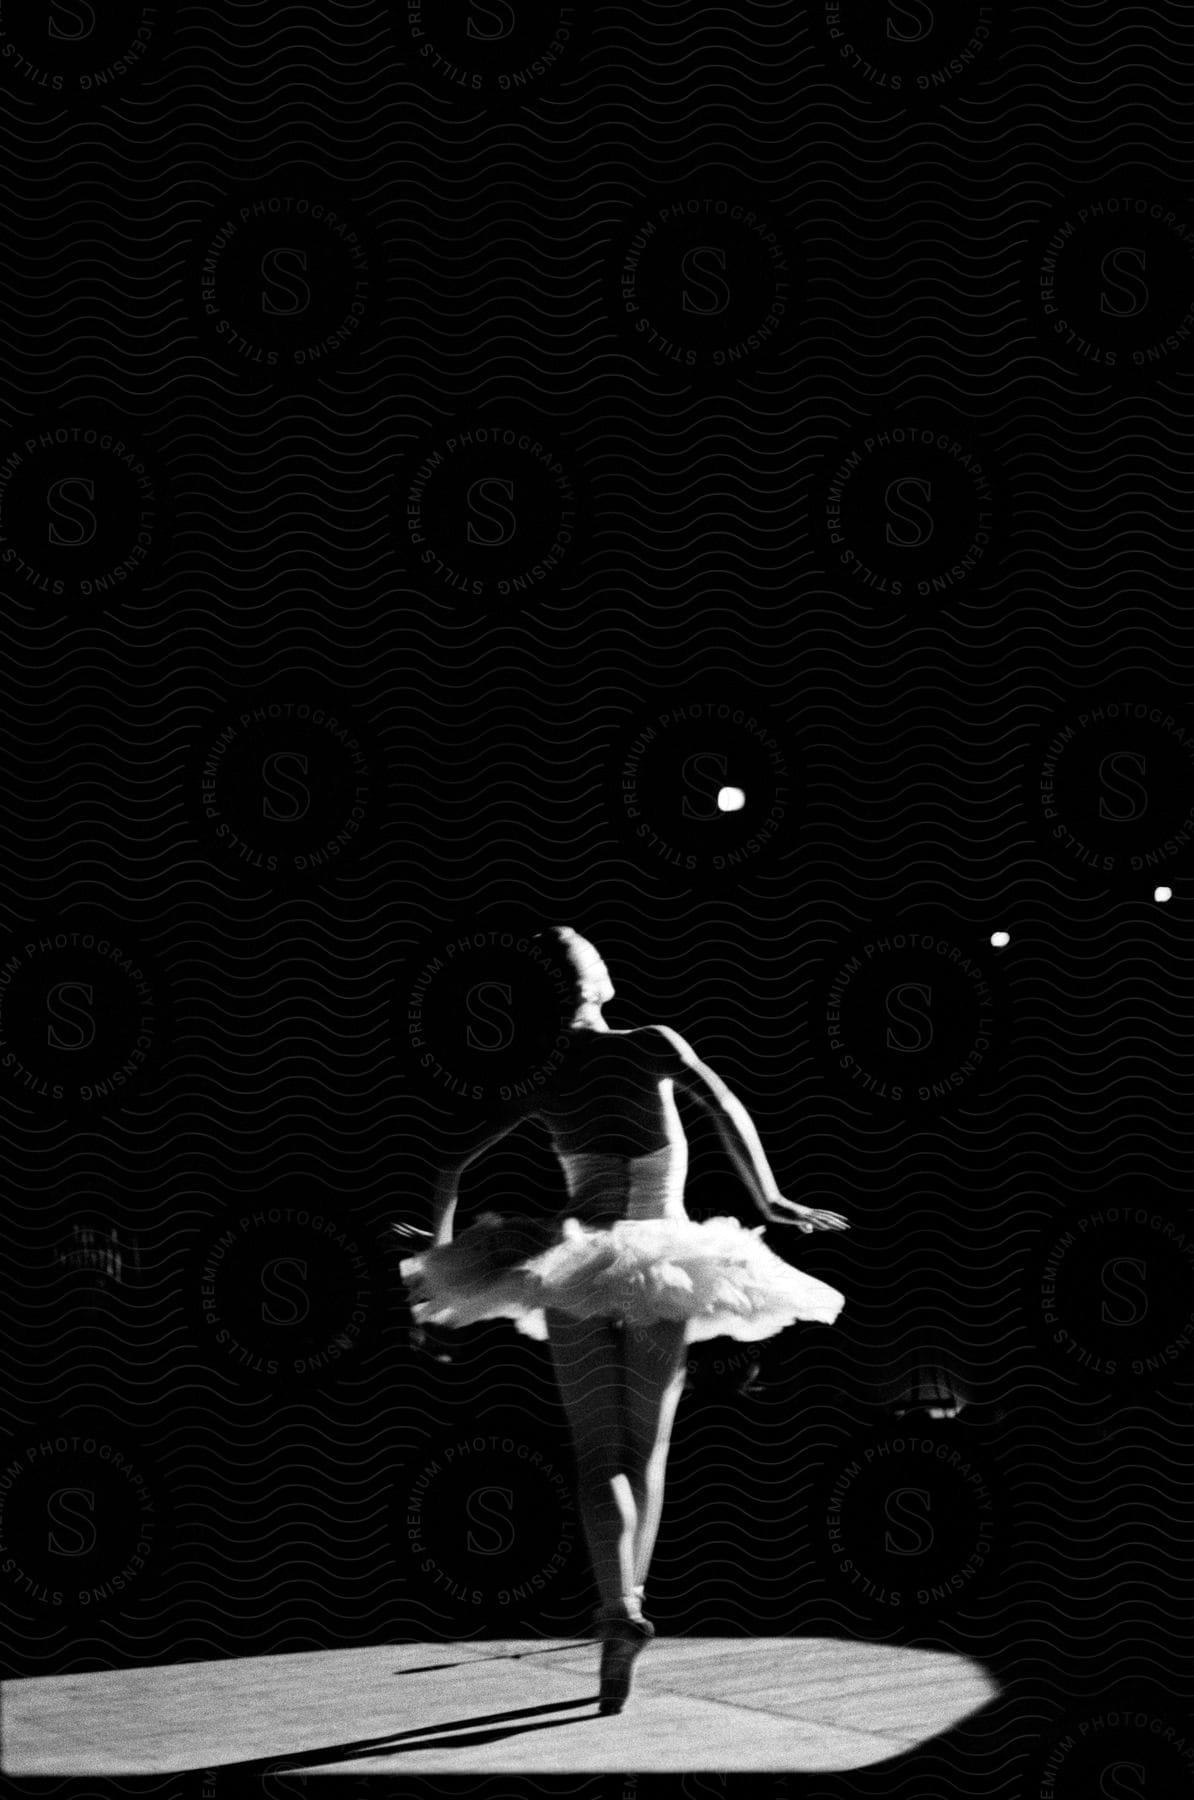 A woman in a tutu is illuminated by a spotlight on a stage in a dark theater